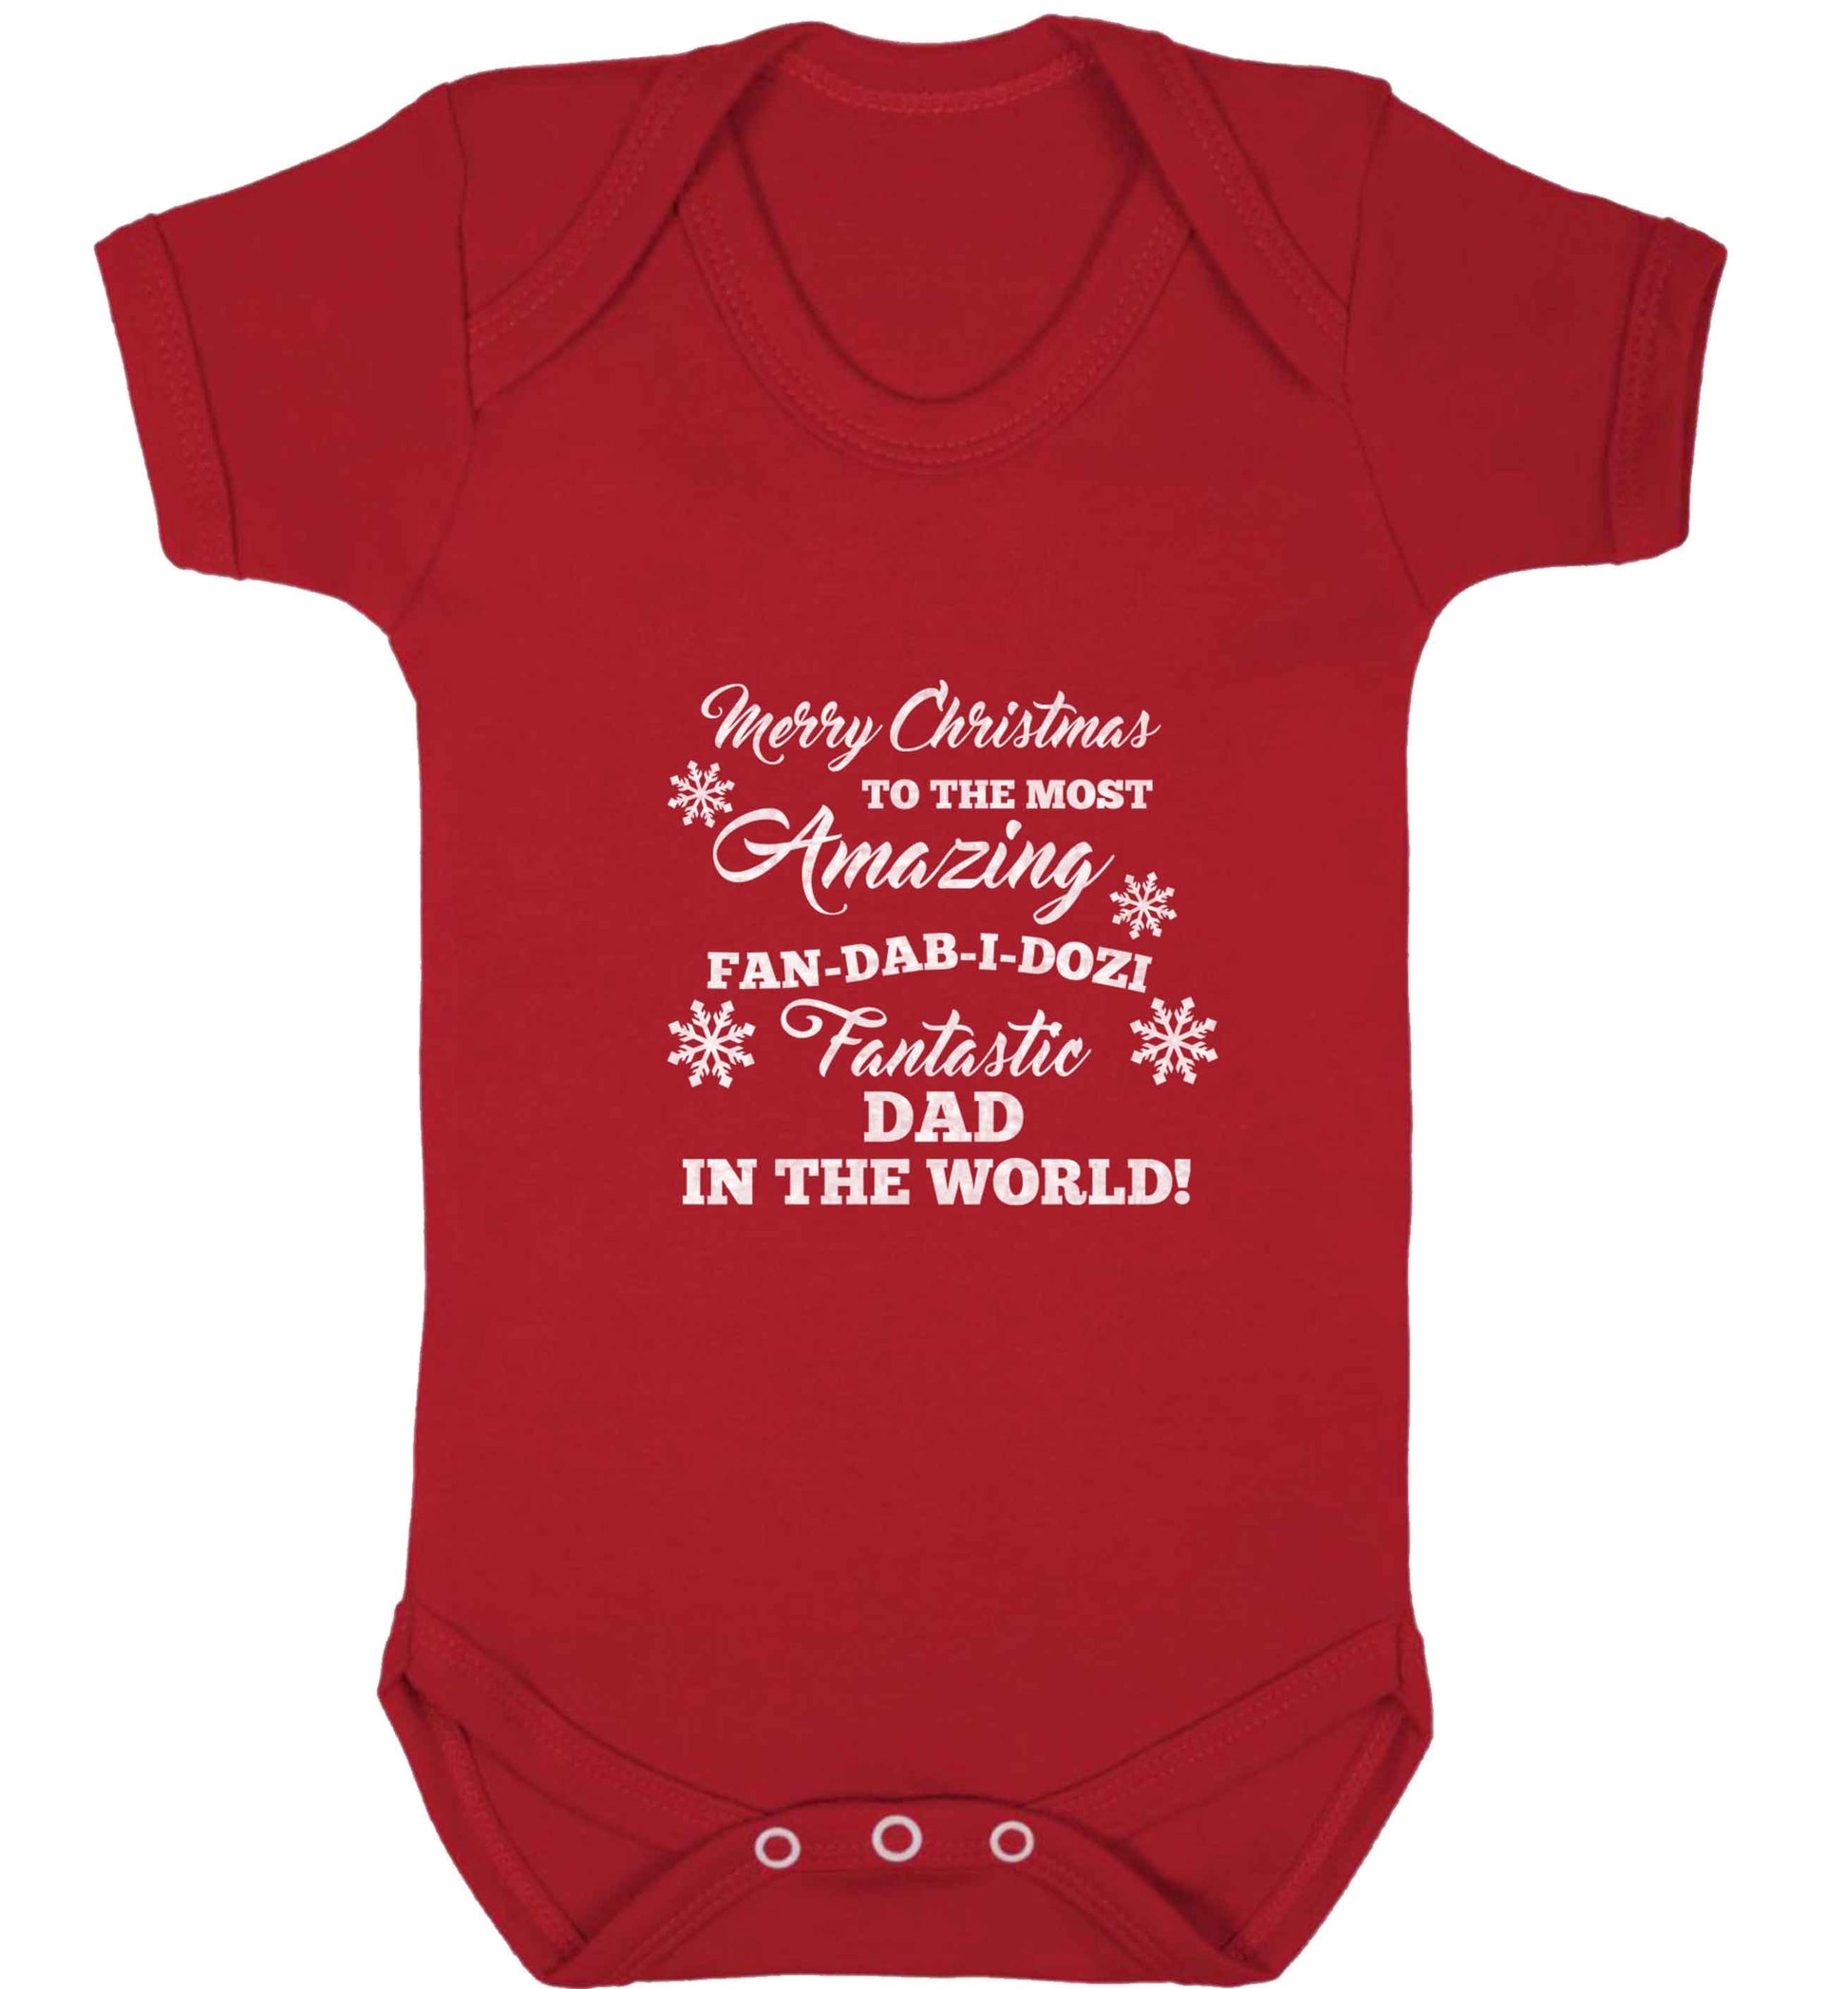 Merry Christmas to the most amazing fan-dab-i-dozi fantasic Dad in the world baby vest red 18-24 months